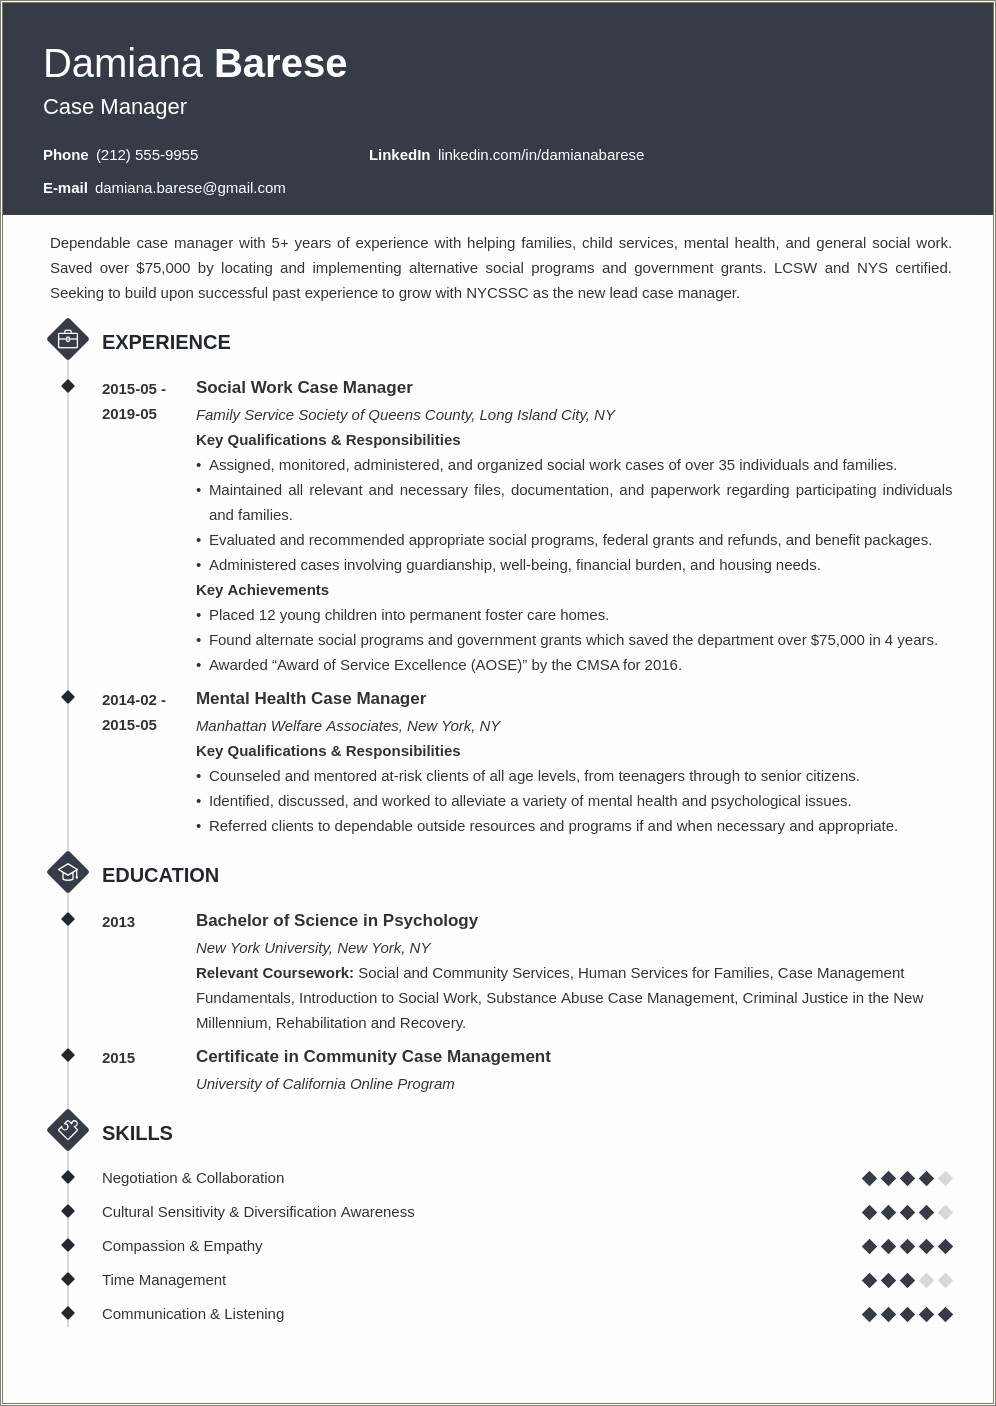 Resume Summary Examples For Case Manager